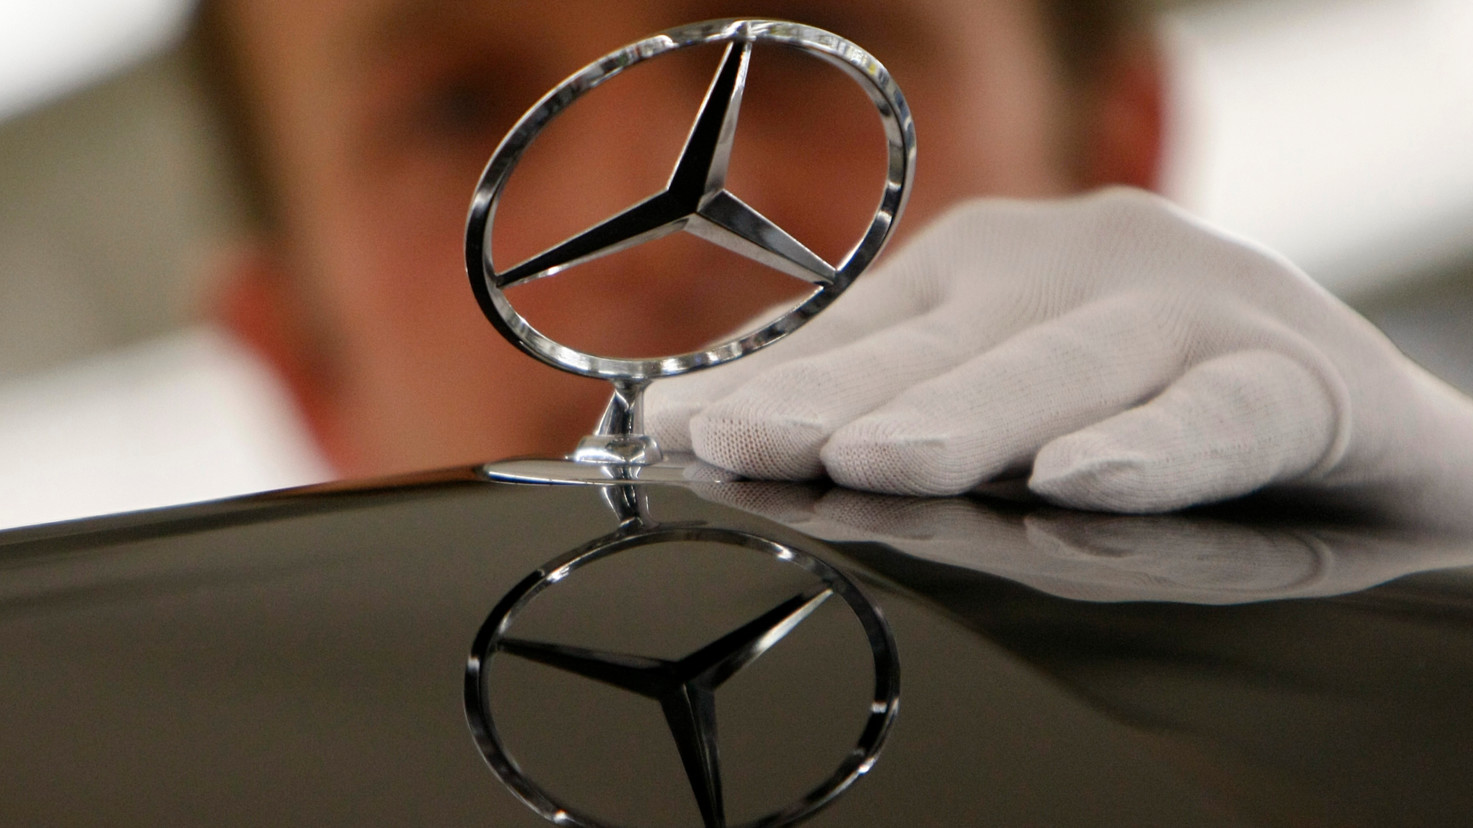 Daimler to cut personnel cost by 1.4bn to meet CO2 targets